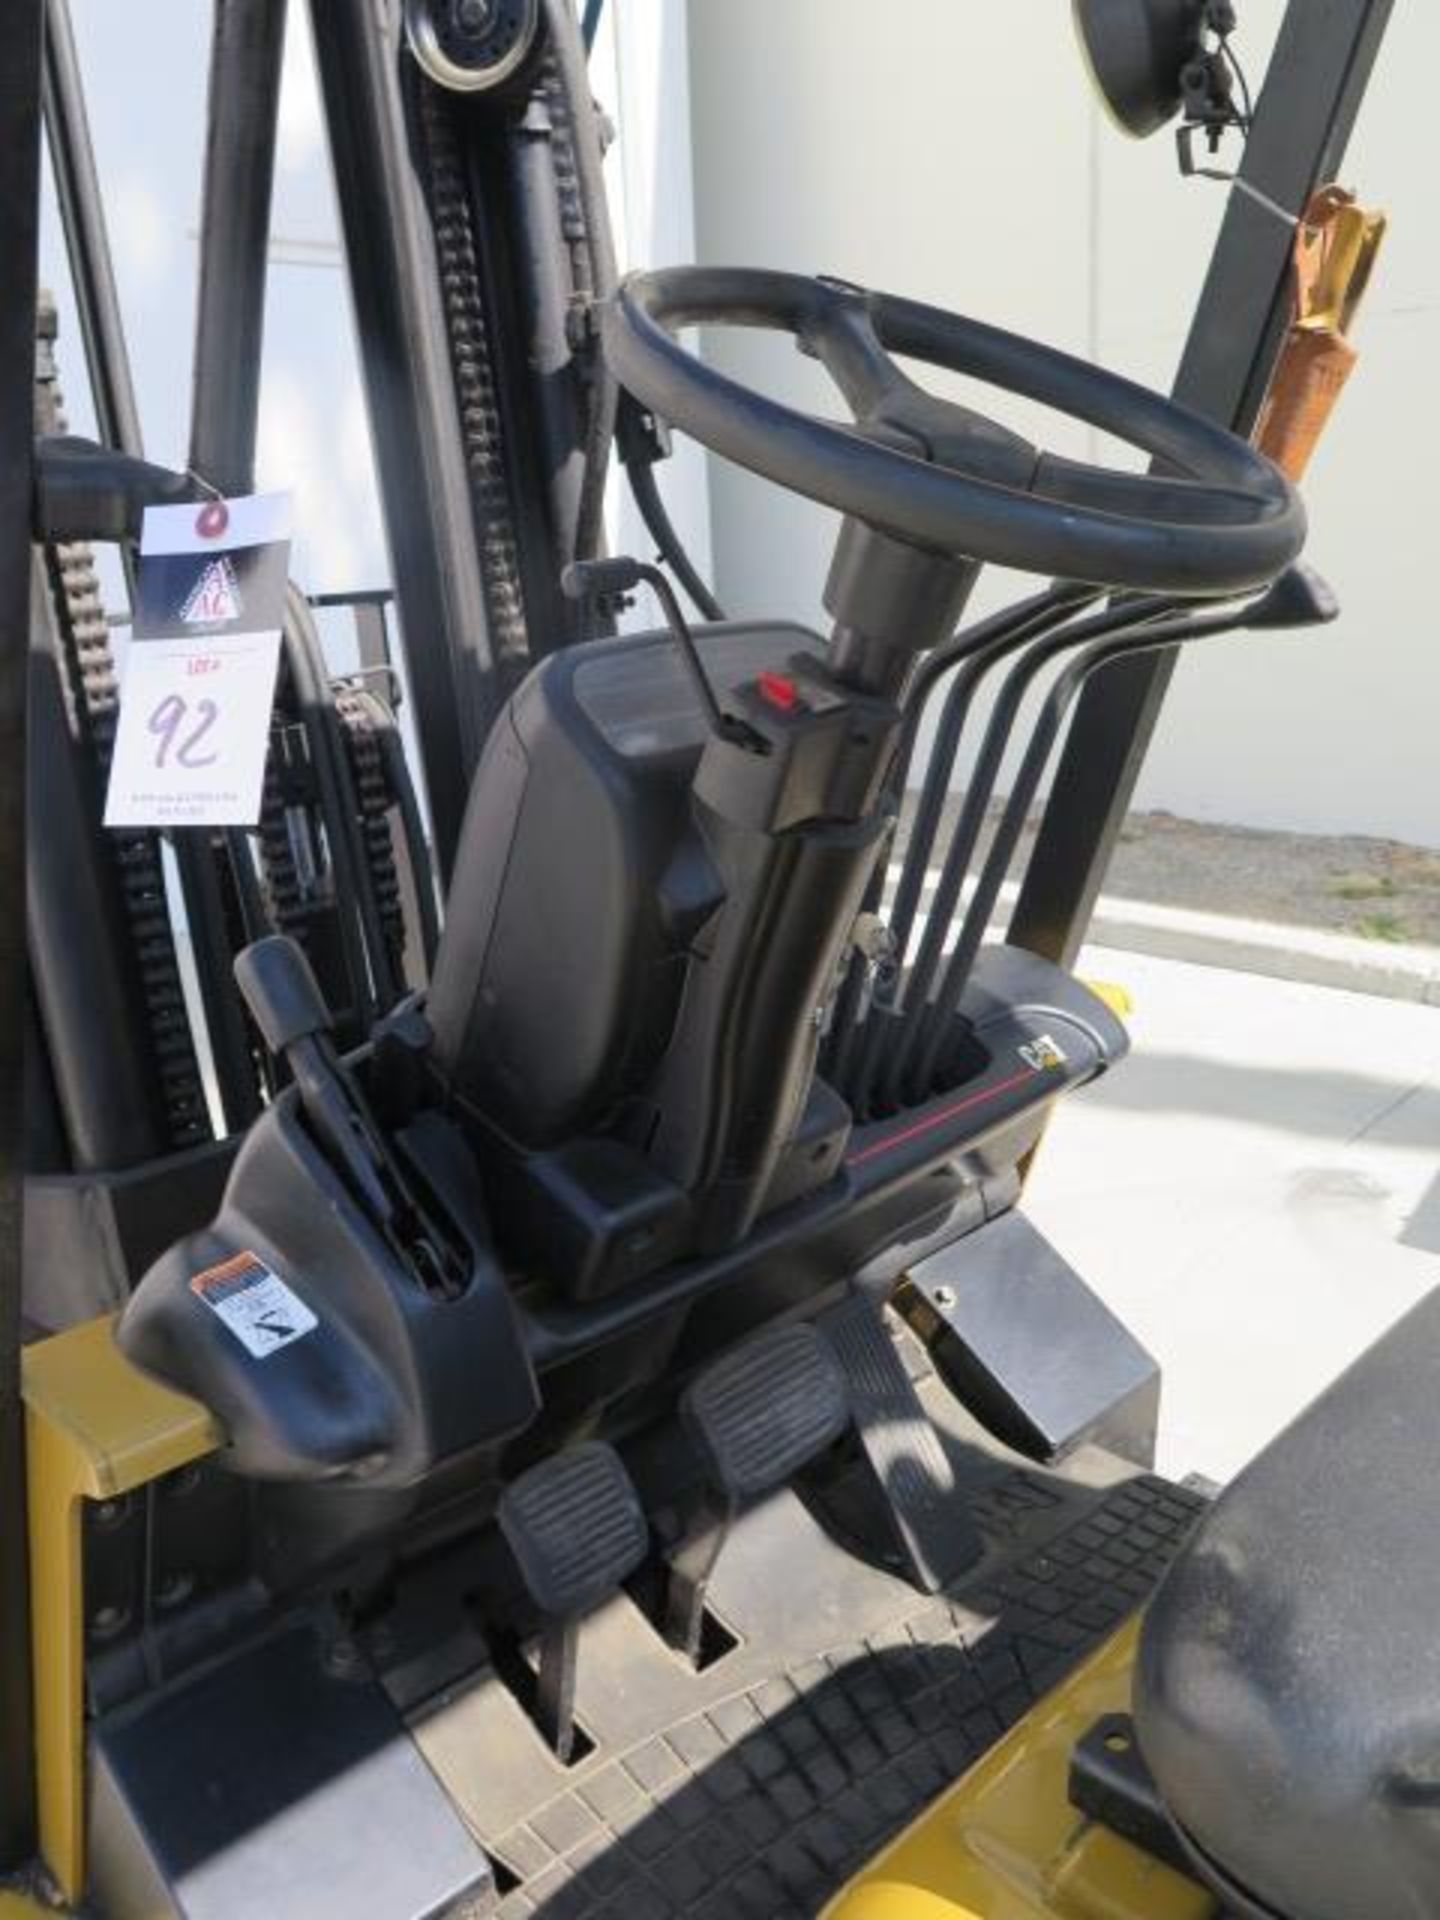 Caterpillar CG25K 4700 Lb Cap LPG Forklift s/n AT82C-03379 w/ 3-Stage, 188” Lift, SOLD AS IS - Image 7 of 17